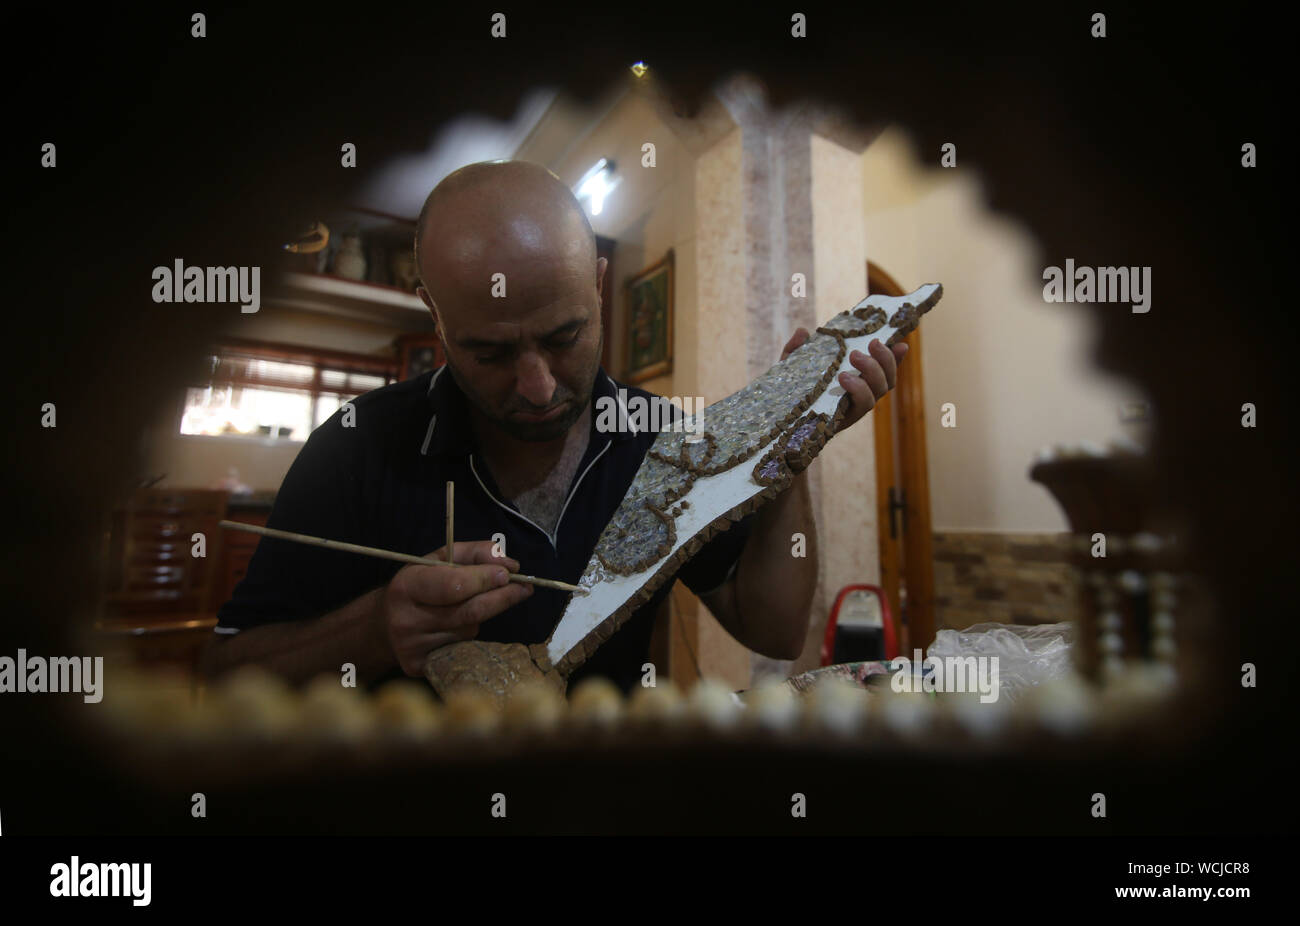 Gaza. 28th Aug, 2019. Kamal al-Madhoun makes an art piece with seashells at his house in Nusseirat refugee camp in the central Gaza Strip, Aug. 28, 2019. Kamal al-Madhoun, a 43-year-old Palestinian man, began the hobby of seashell art about 20 years ago. Using seashells collected from Gaza beaches, he has made various art pieces. Credit: Khaled Omar/Xinhua Stock Photo